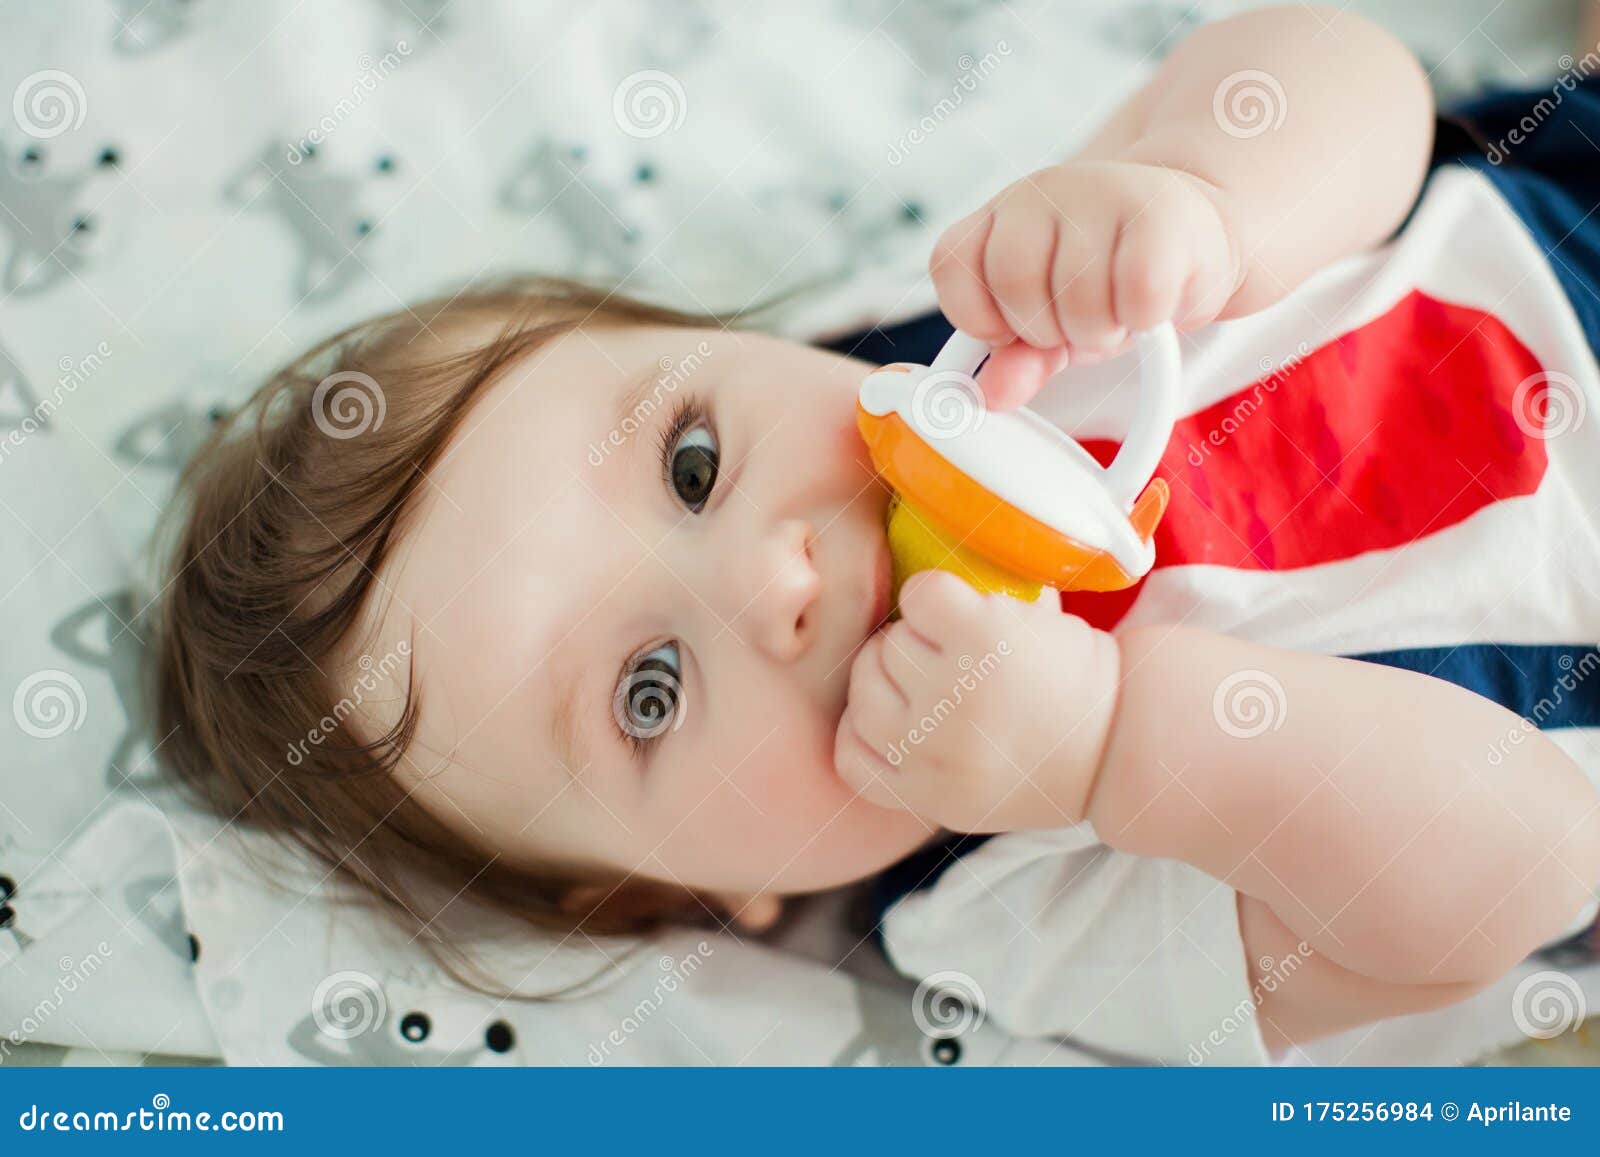 little boy eat fruits from baby`s nibbler